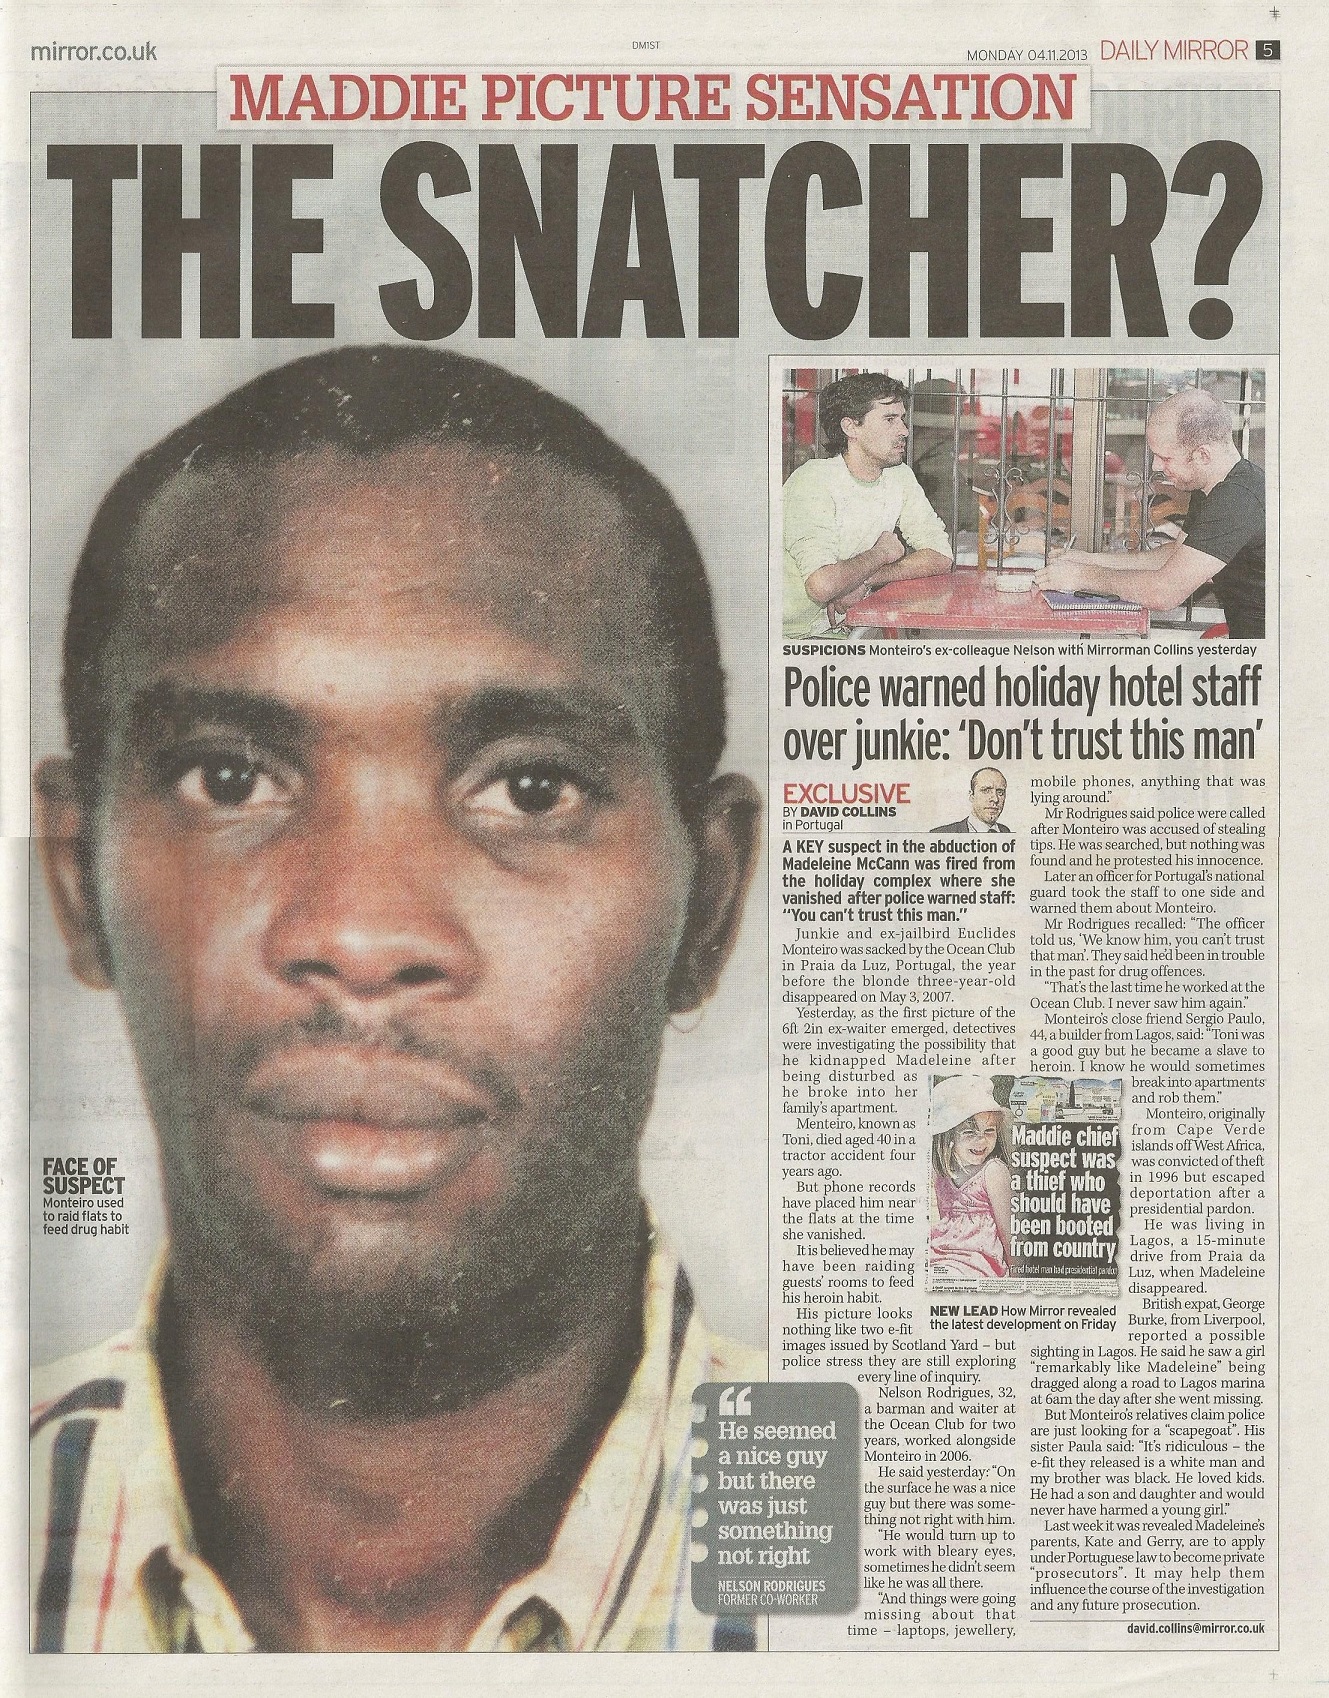 Daily Mirror, paper edition, page 5: 'MADDIE PICTURE SENSATION - THE SNATCHER?', 04 November 2013